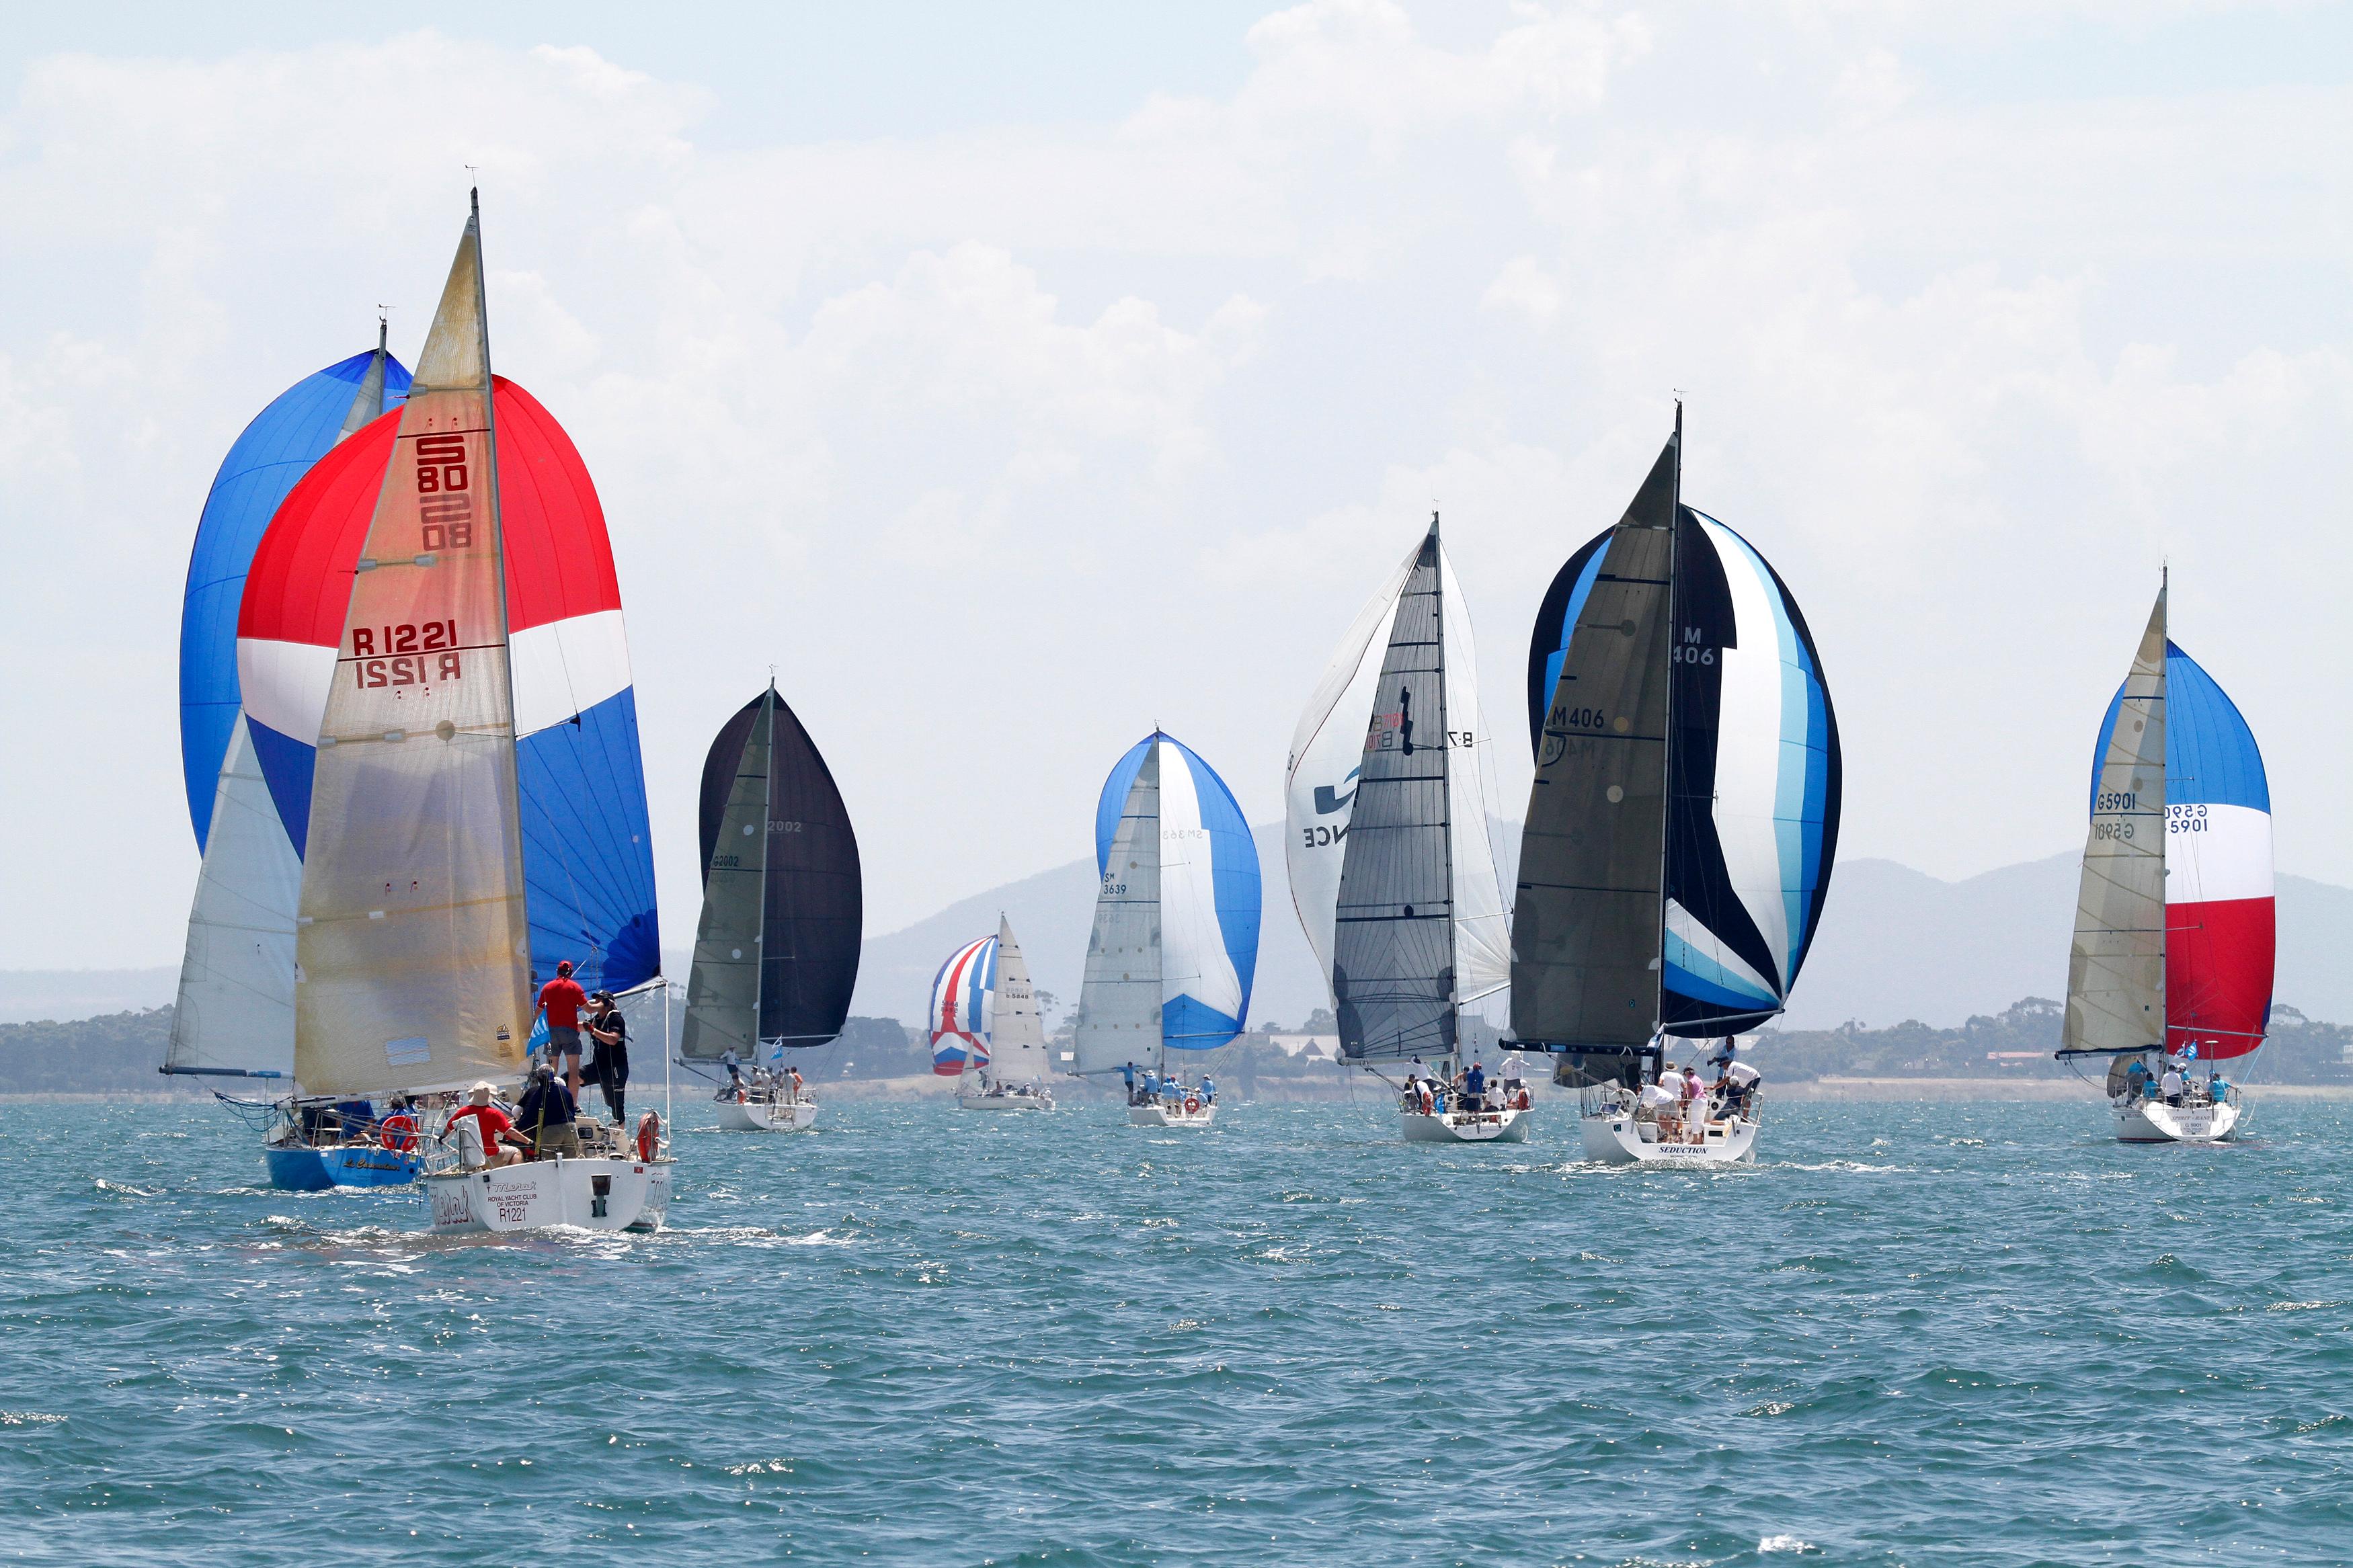 Melges World Champs for Geelong